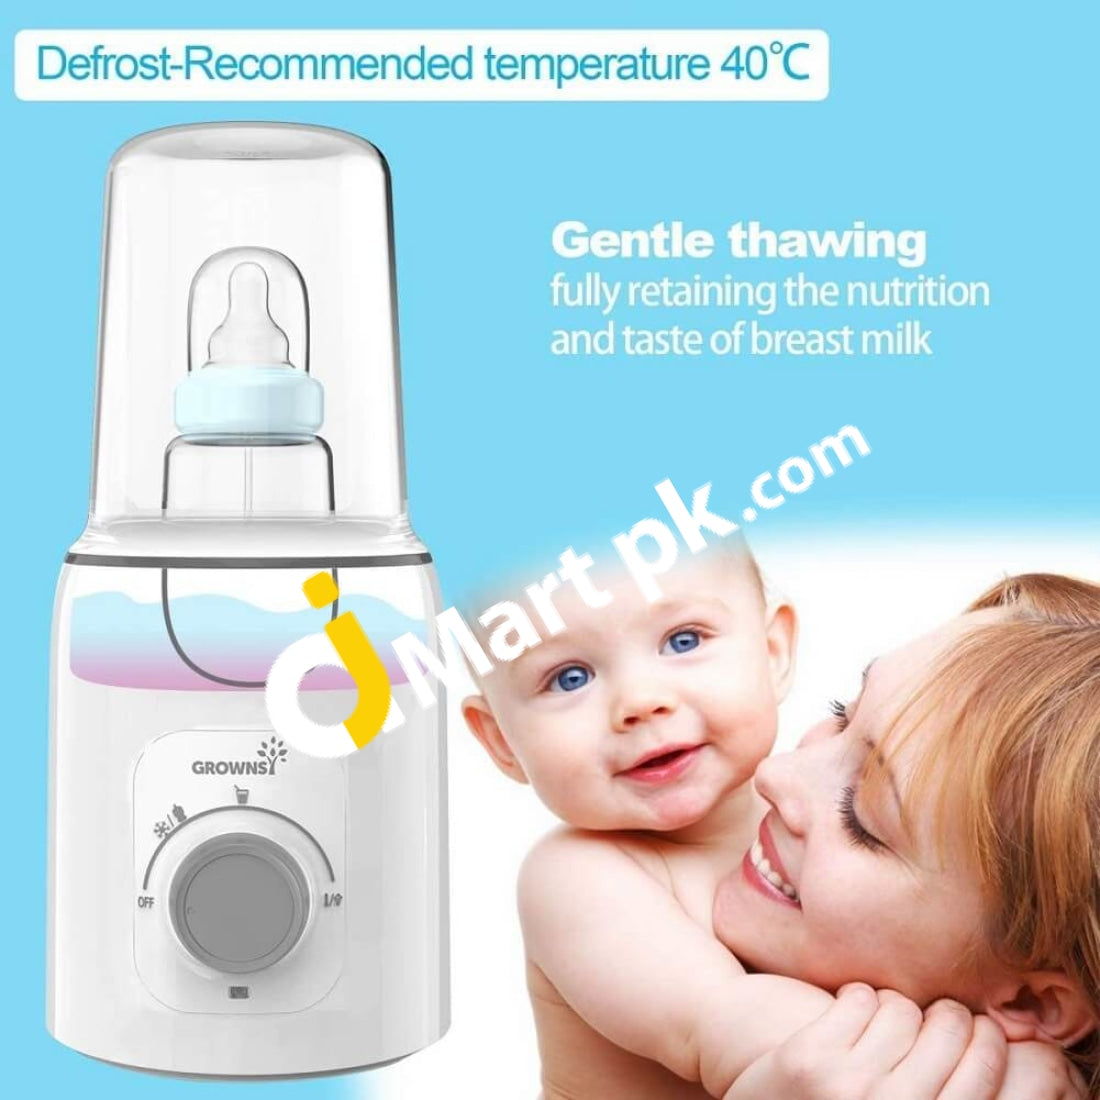 GROWNSY Instant Baby Bottle Warmer Precise 4 Temperatures Control